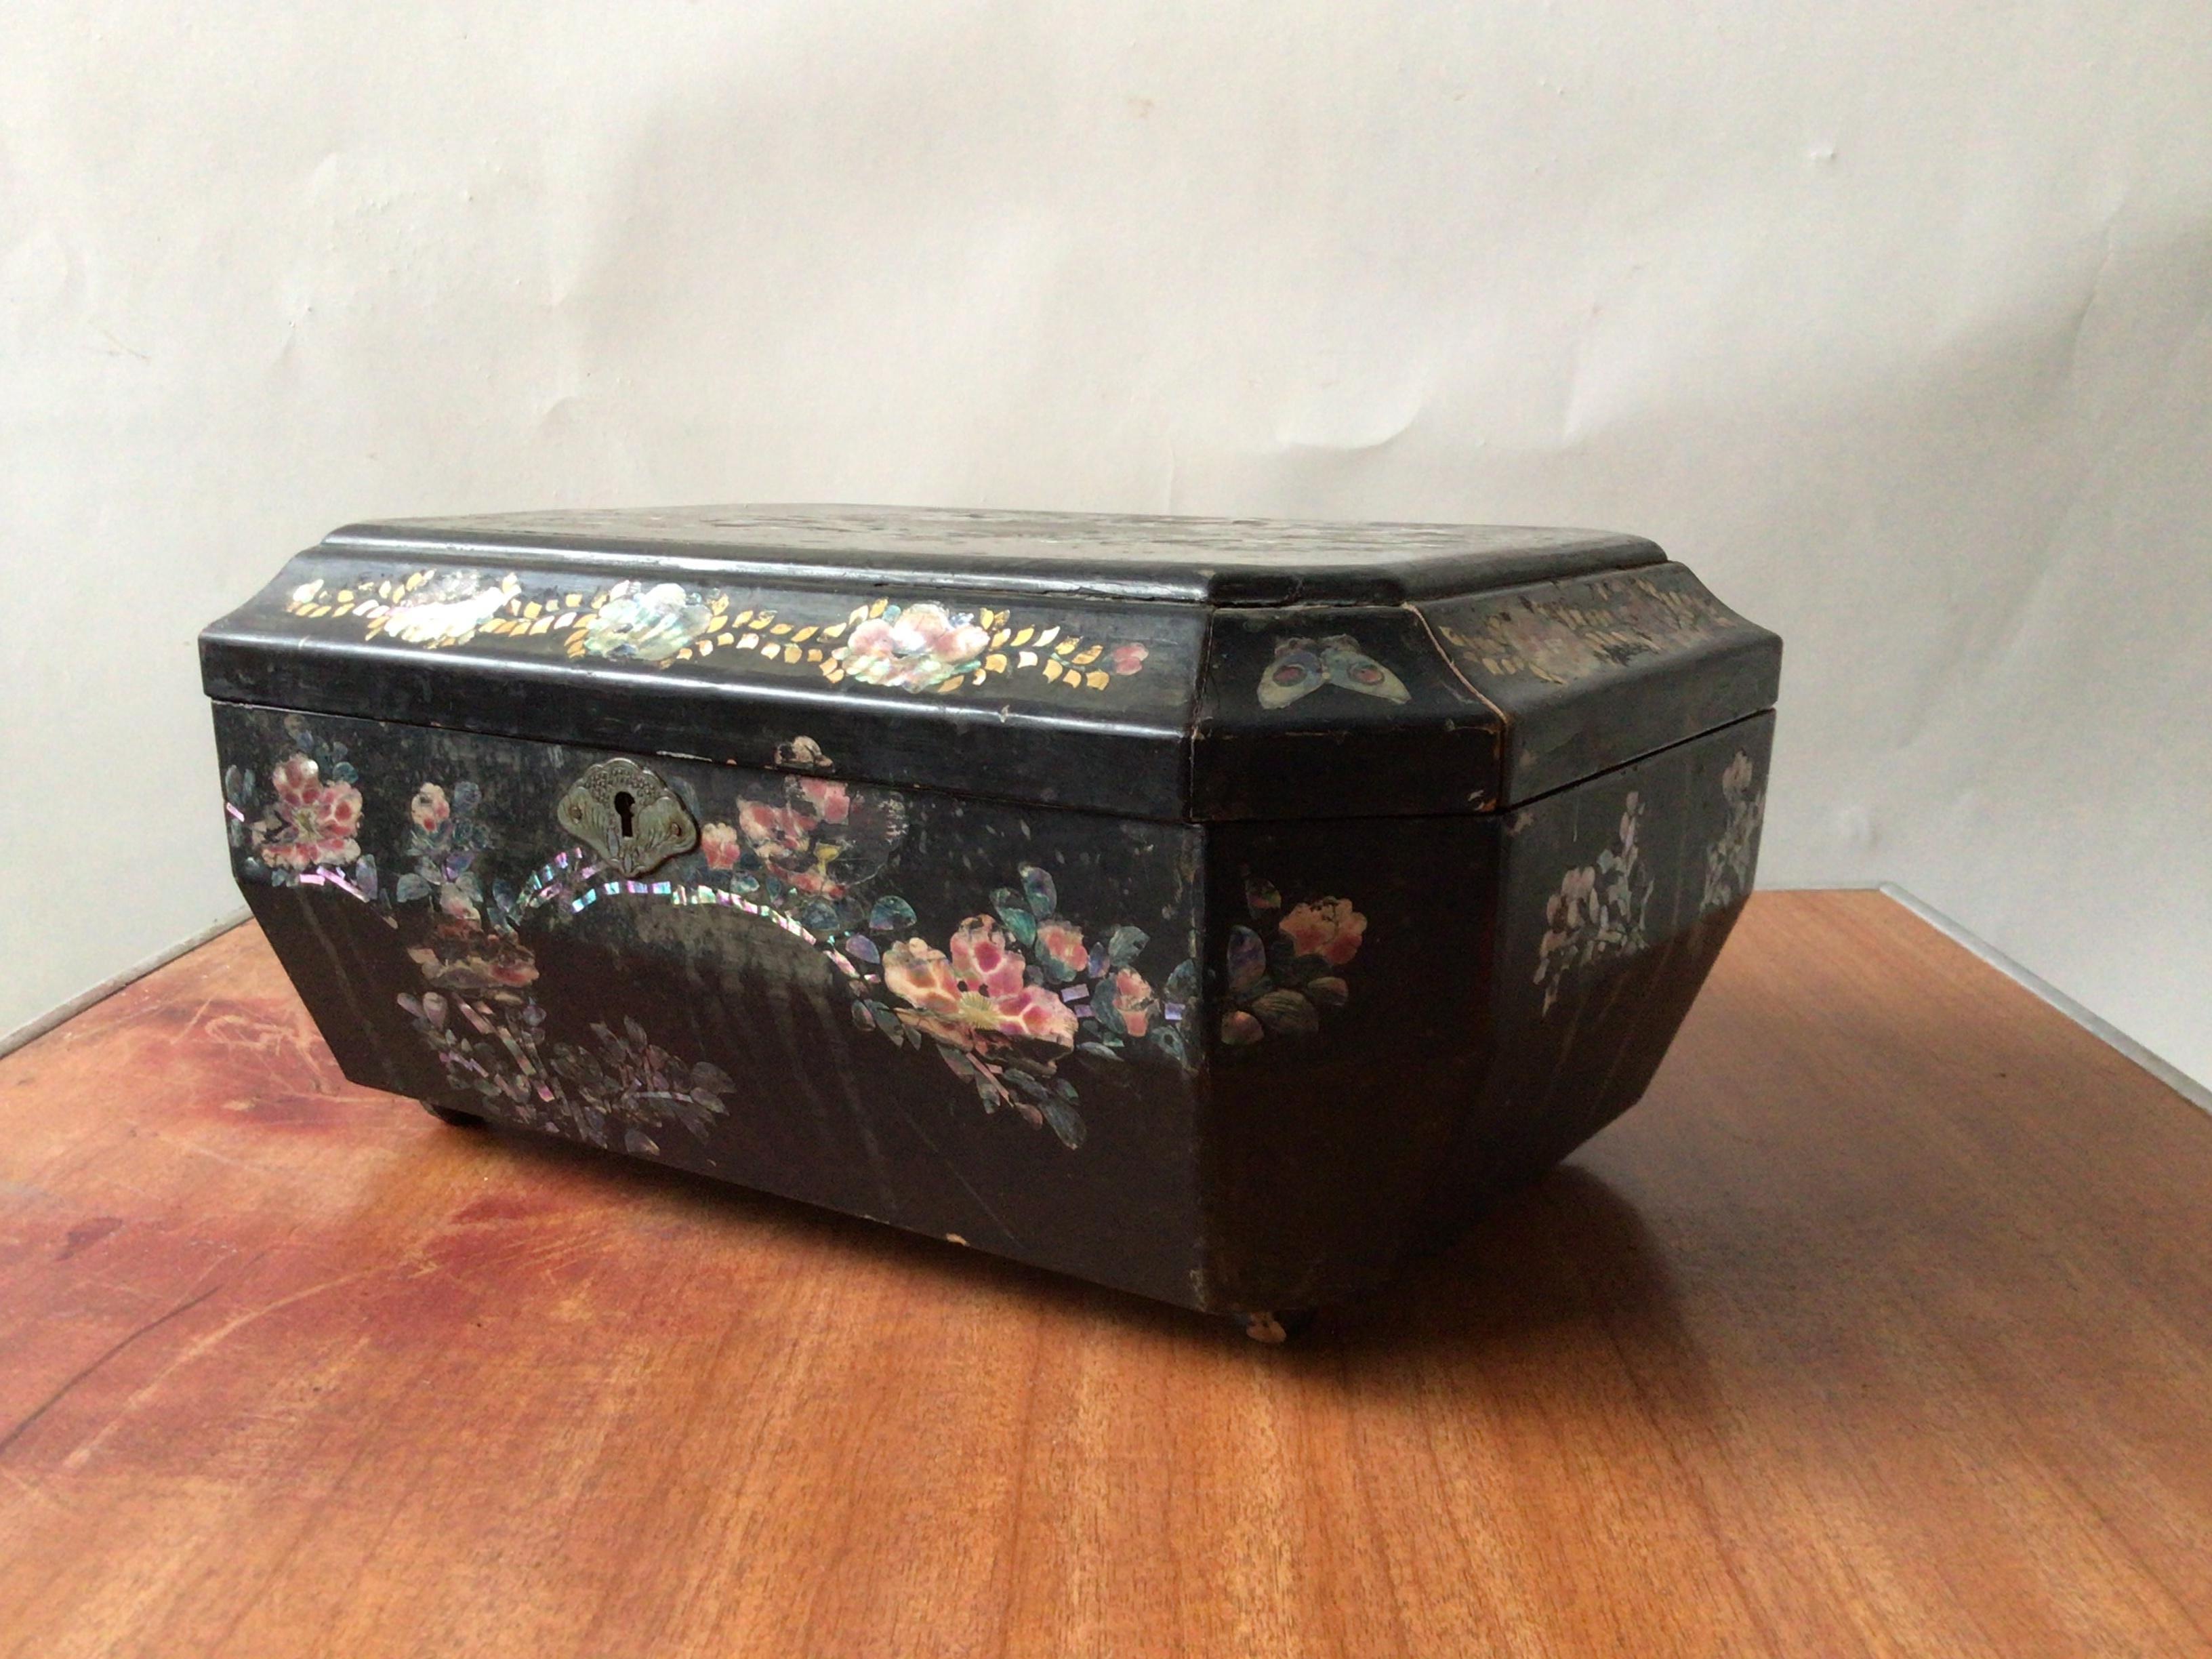 1880s Hand painted box with mother of Pearl adornment. Purchased from an East Hampton estate.